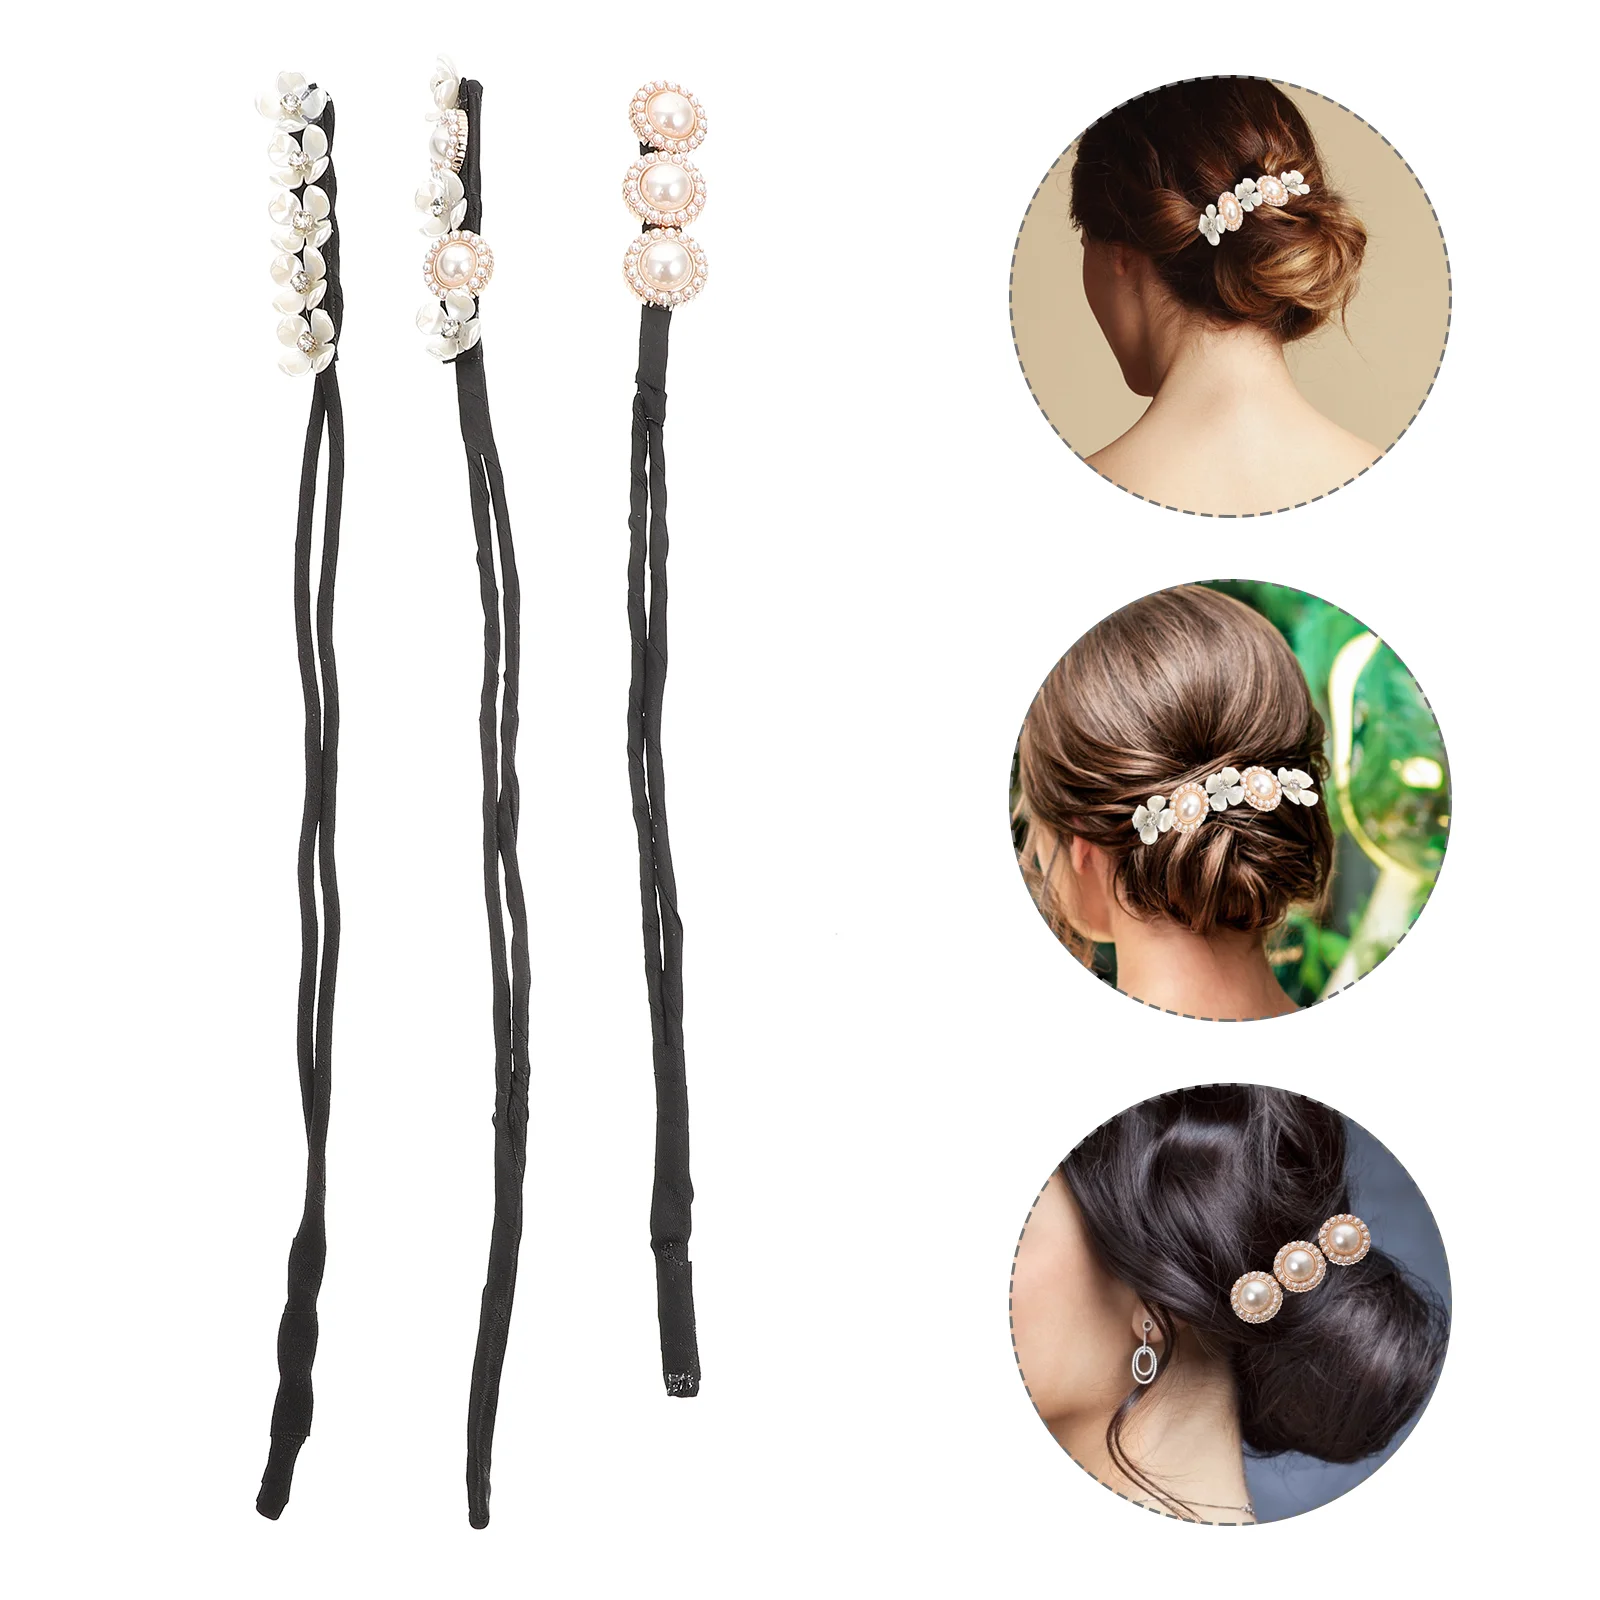 

3 Pcs Hair Accesories Lazy Curler Styling Bun Shaper Women Vintage Donuts Abs Girls Maker Pearls Bride